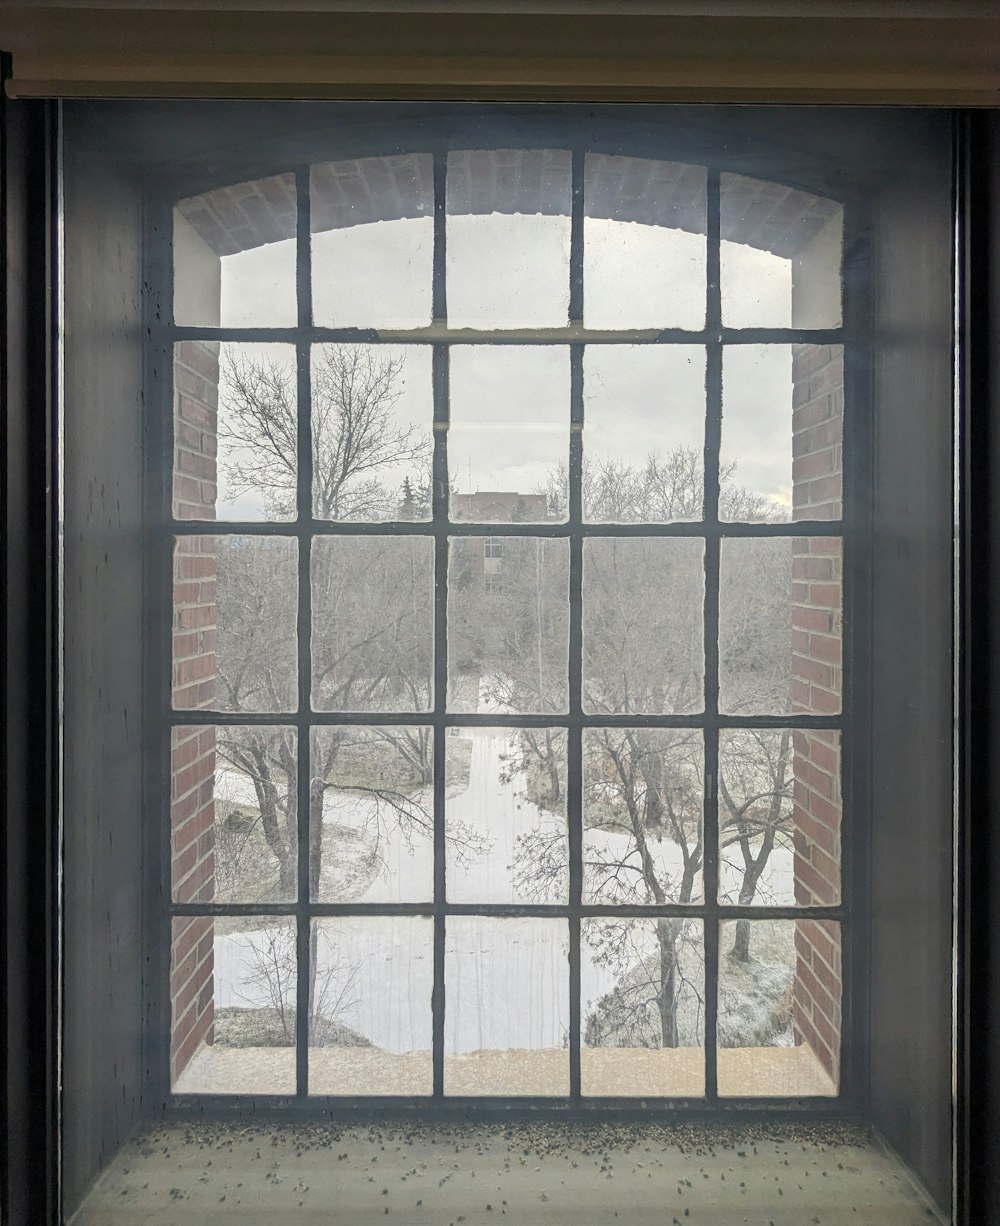 a window with a view of a snowy landscape